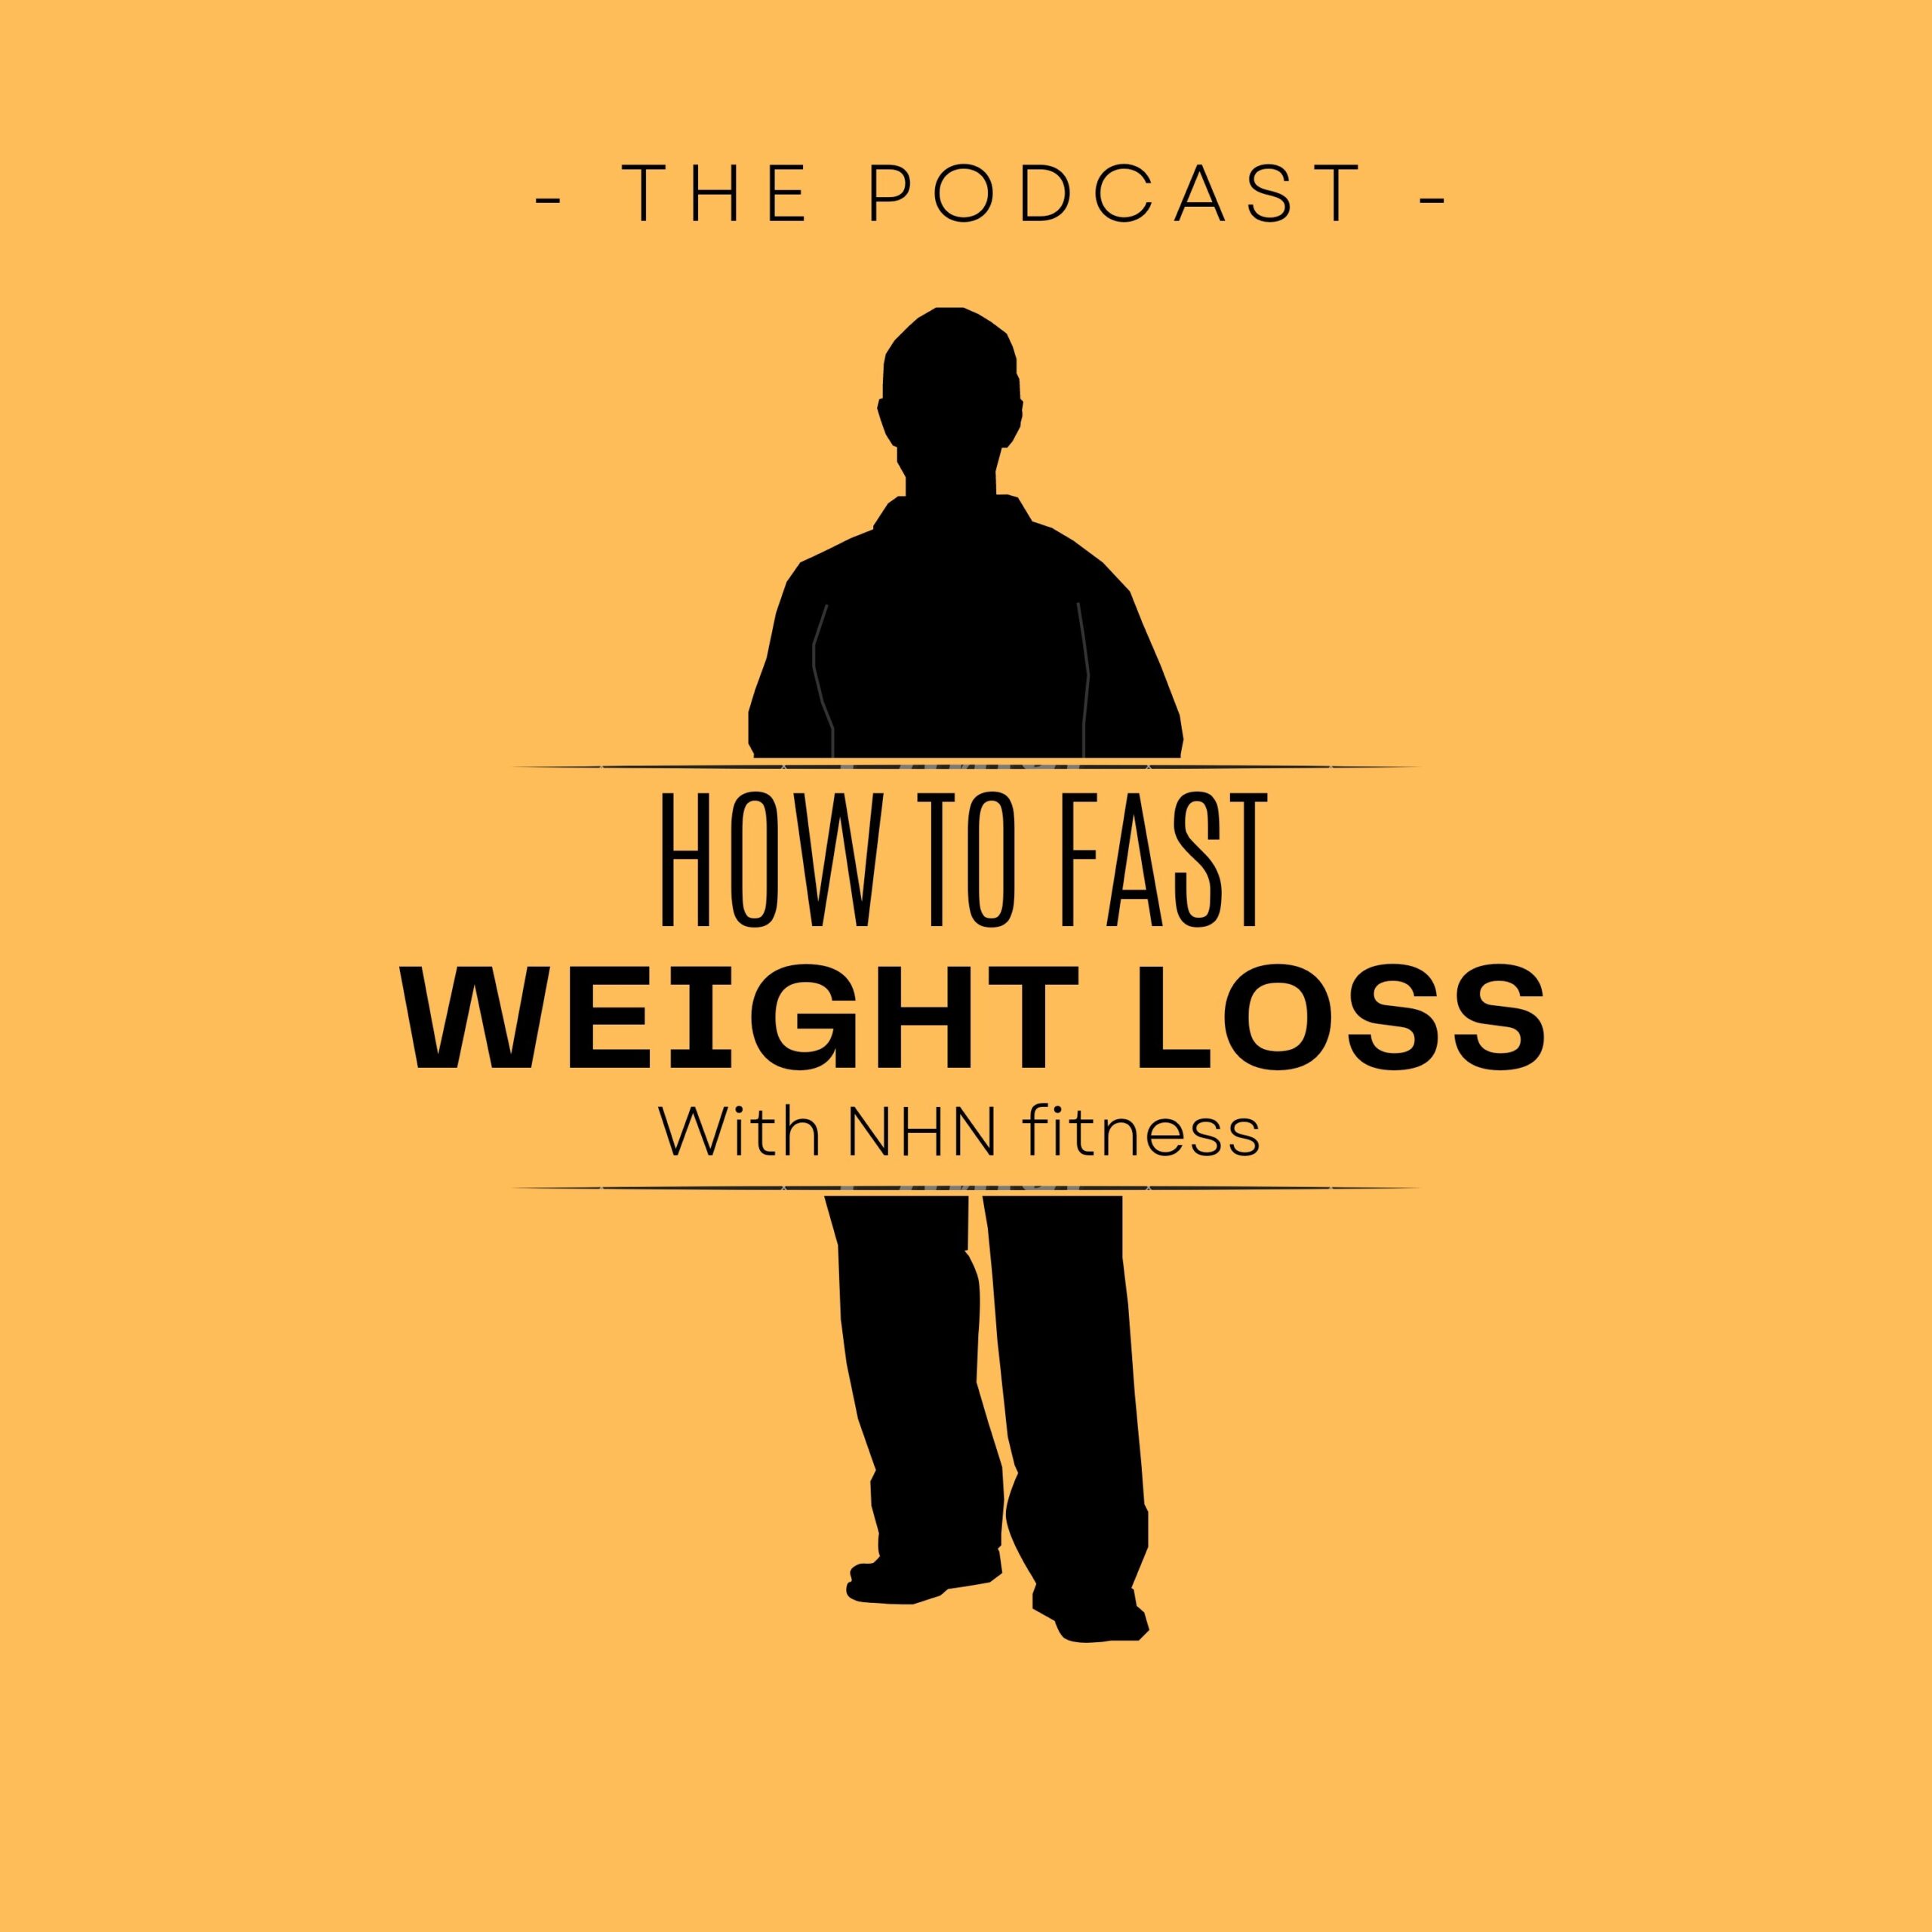 How to Fast Weight Loss Audio Podcast